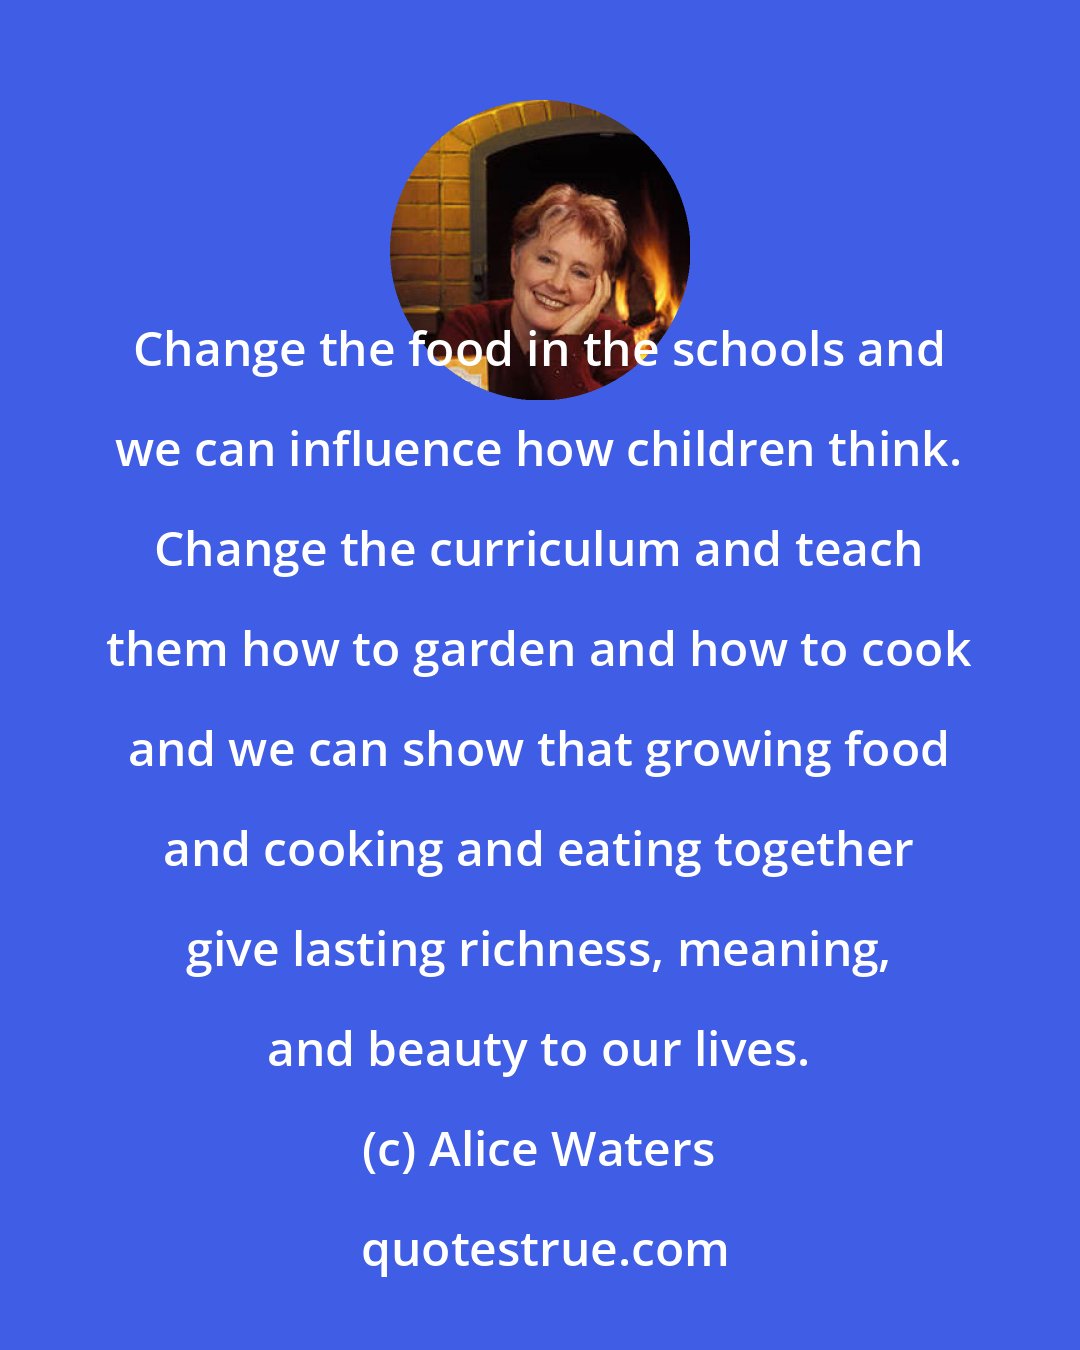 Alice Waters: Change the food in the schools and we can influence how children think. Change the curriculum and teach them how to garden and how to cook and we can show that growing food and cooking and eating together give lasting richness, meaning, and beauty to our lives.